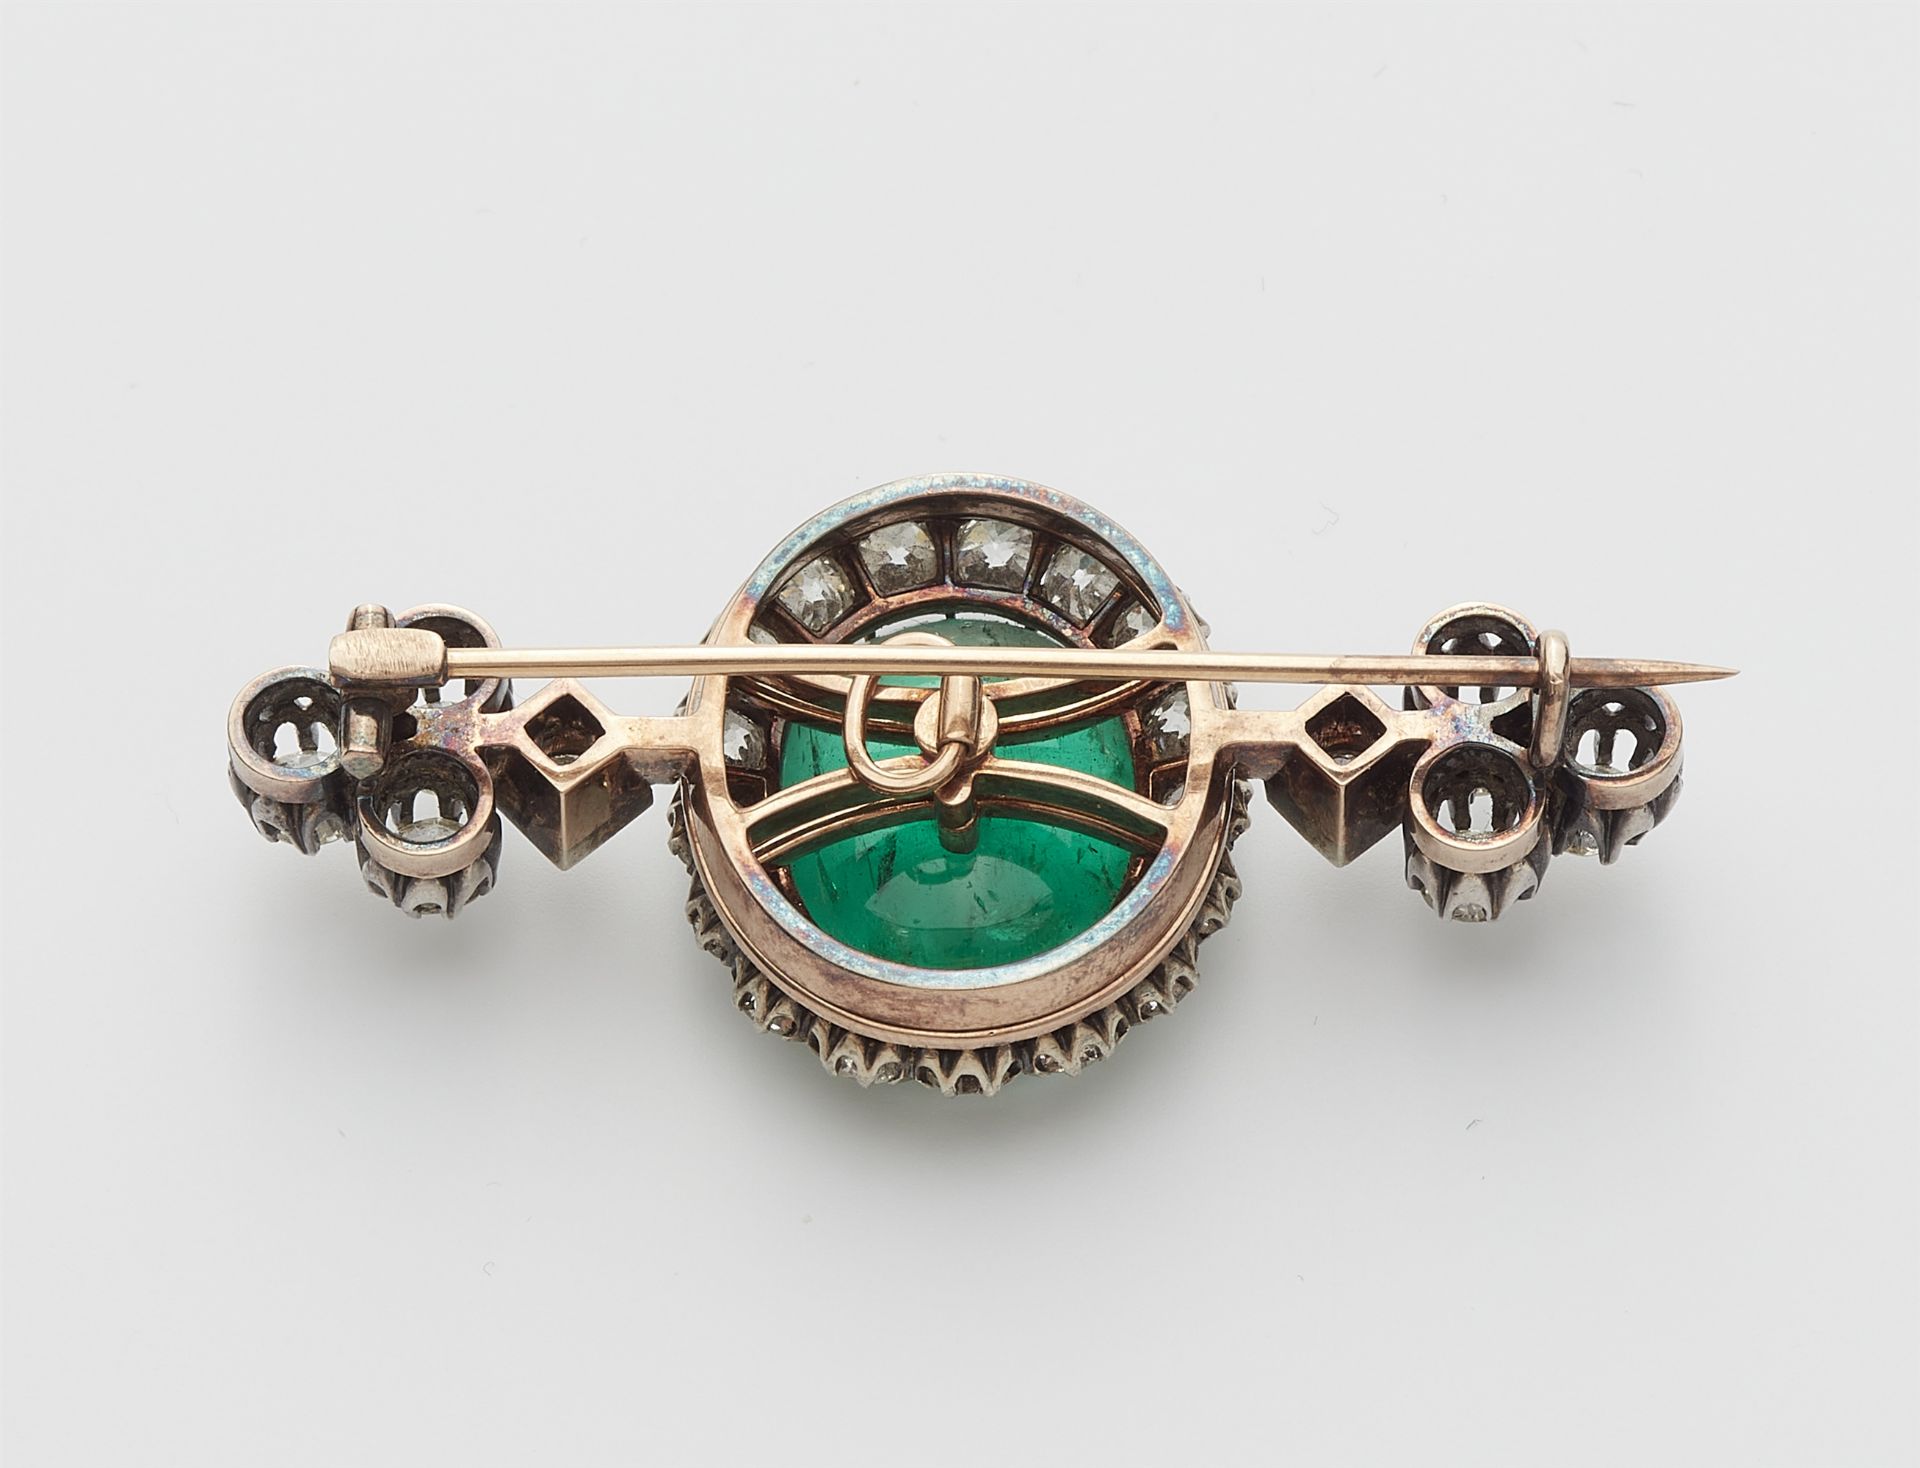 A late 19th century 14k gold and diamond pin brooch with a detachable fine emerald. - Image 2 of 3